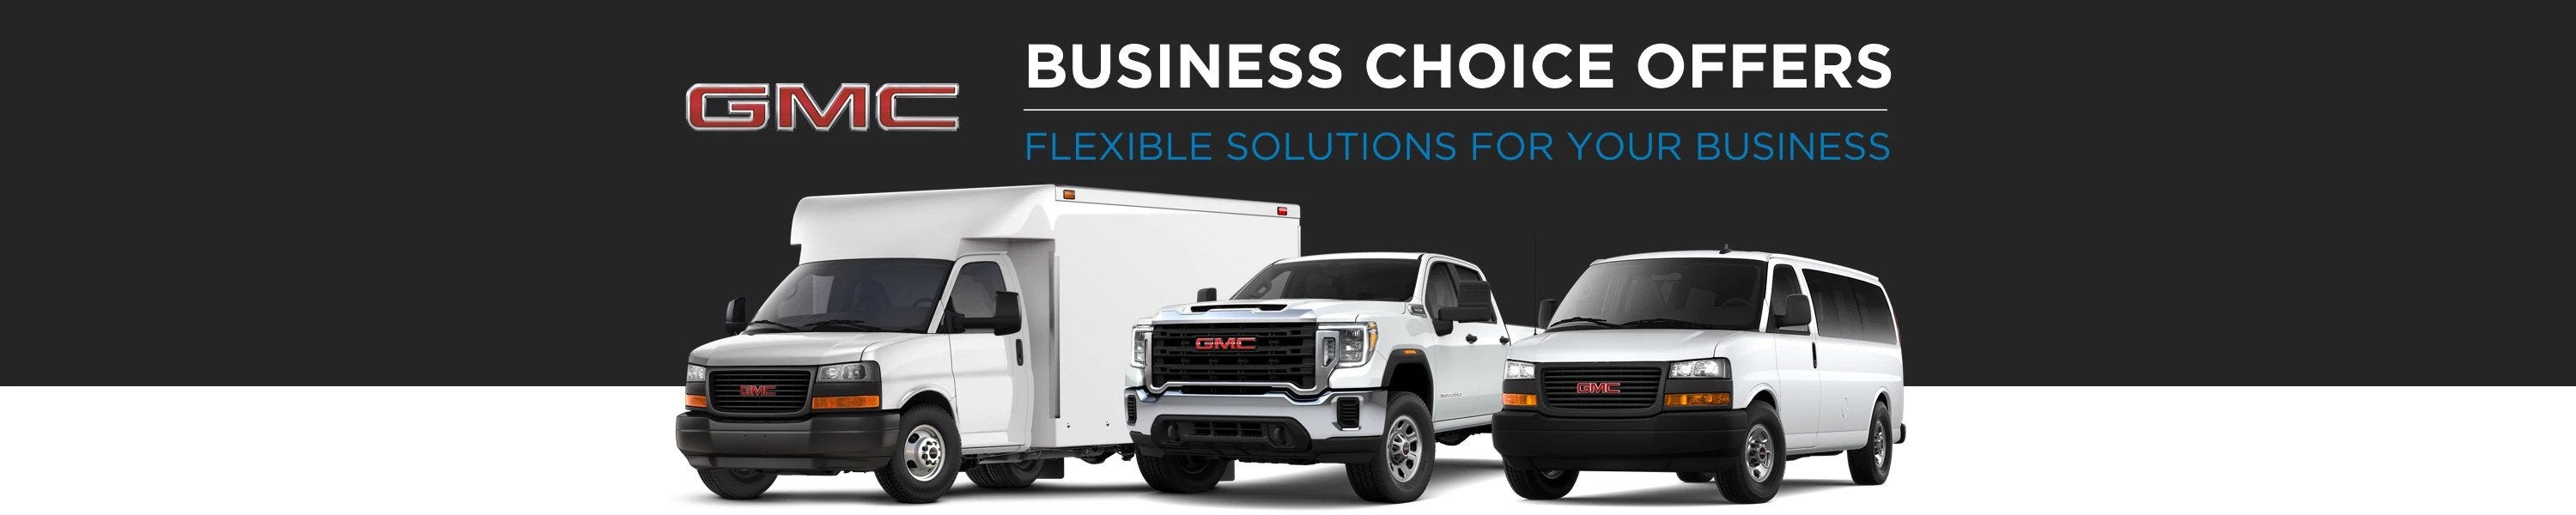 GMC Business Choice Offers - Flexible Solutions for your Business - Beadles Chevrolet GMC in Mobridge SD